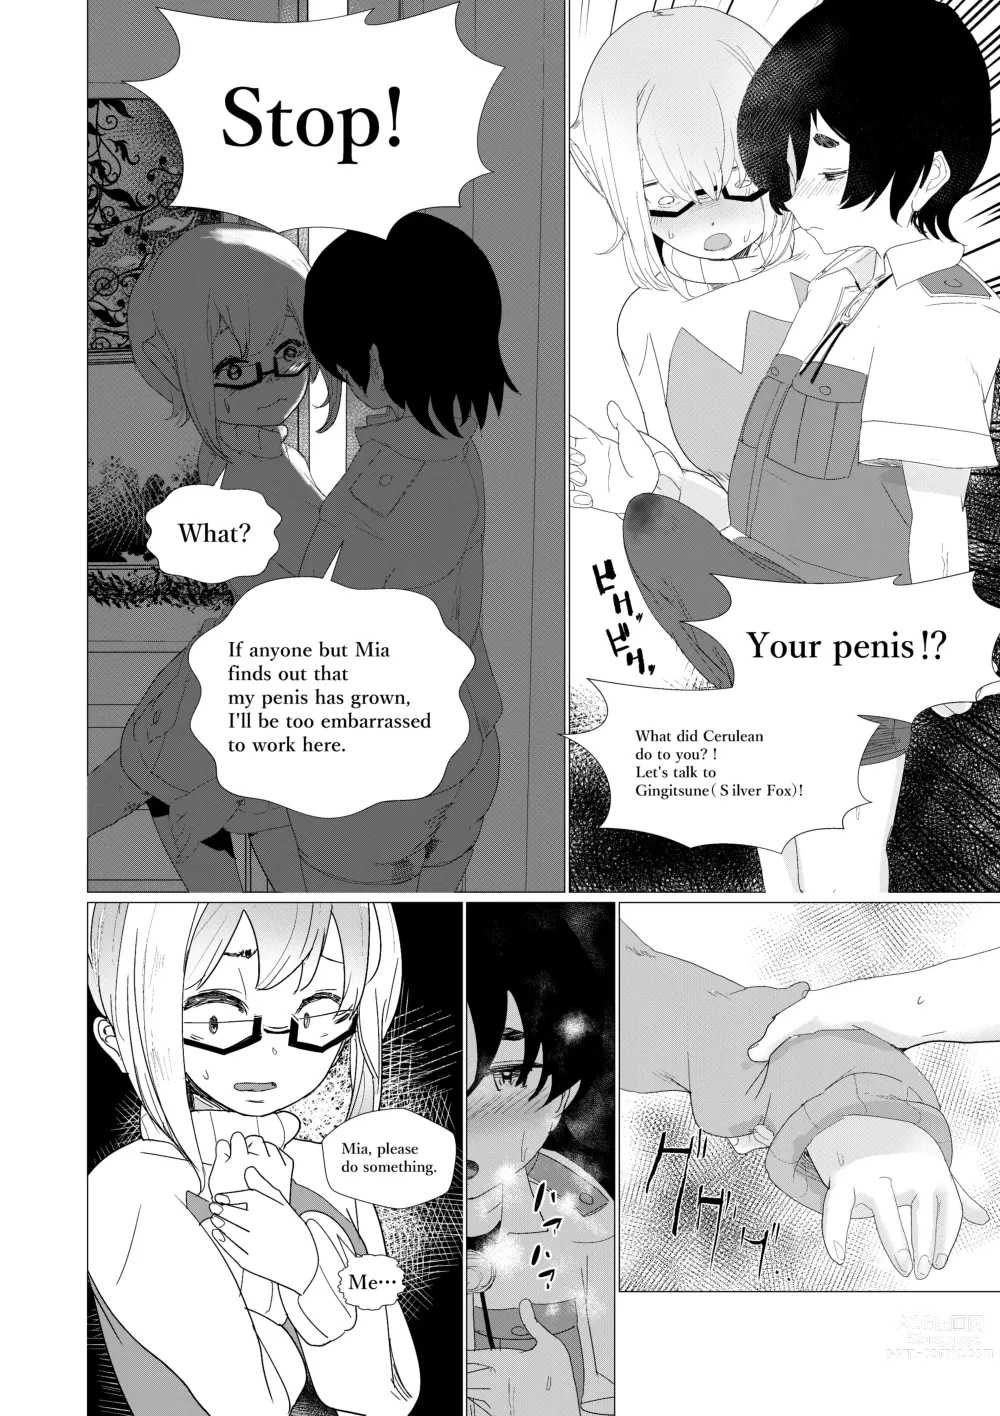 Page 34 of doujinshi Sensei... My Penis is Going Crazy